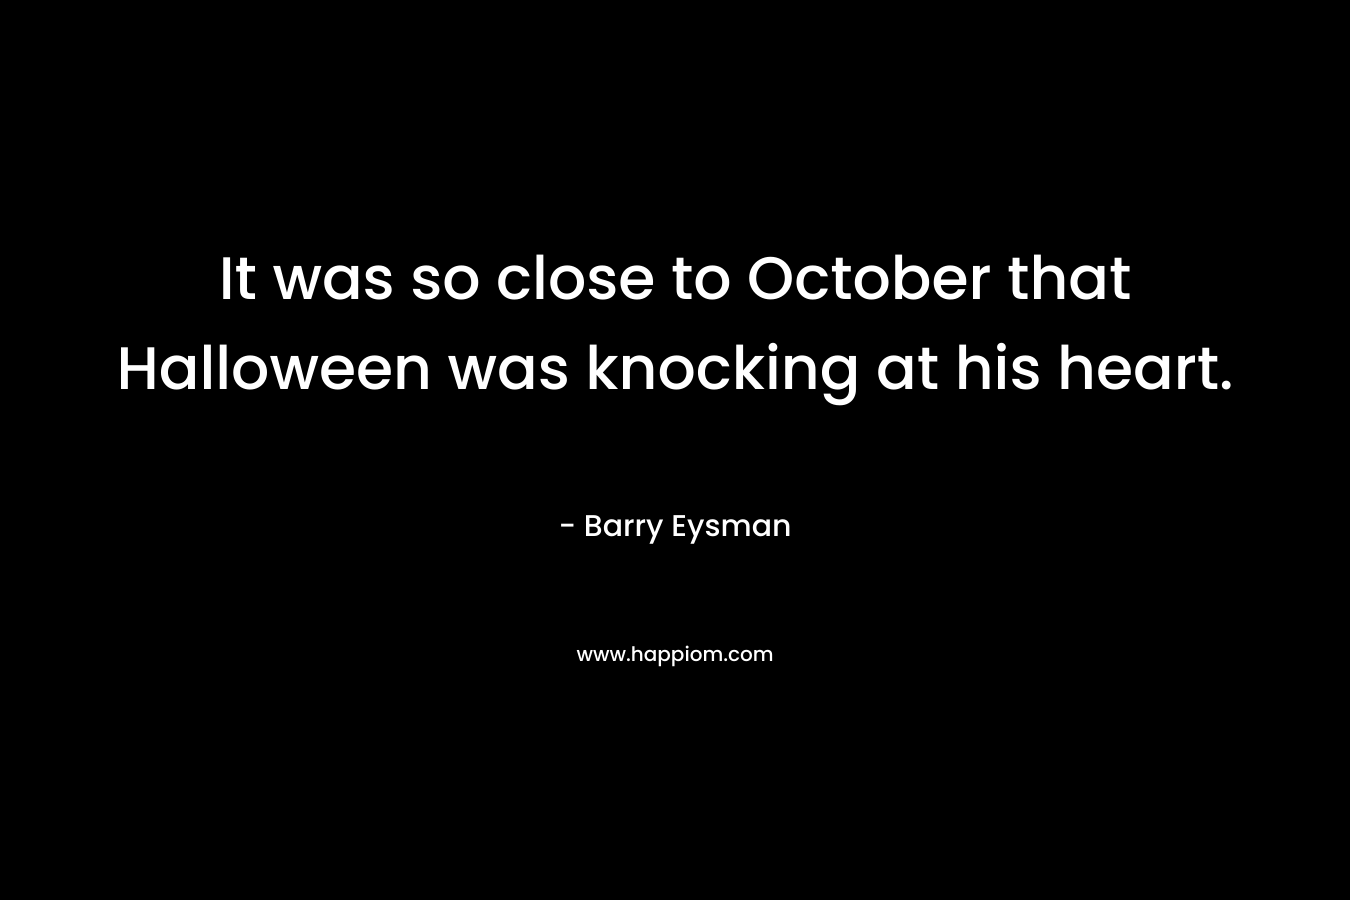 It was so close to October that Halloween was knocking at his heart.